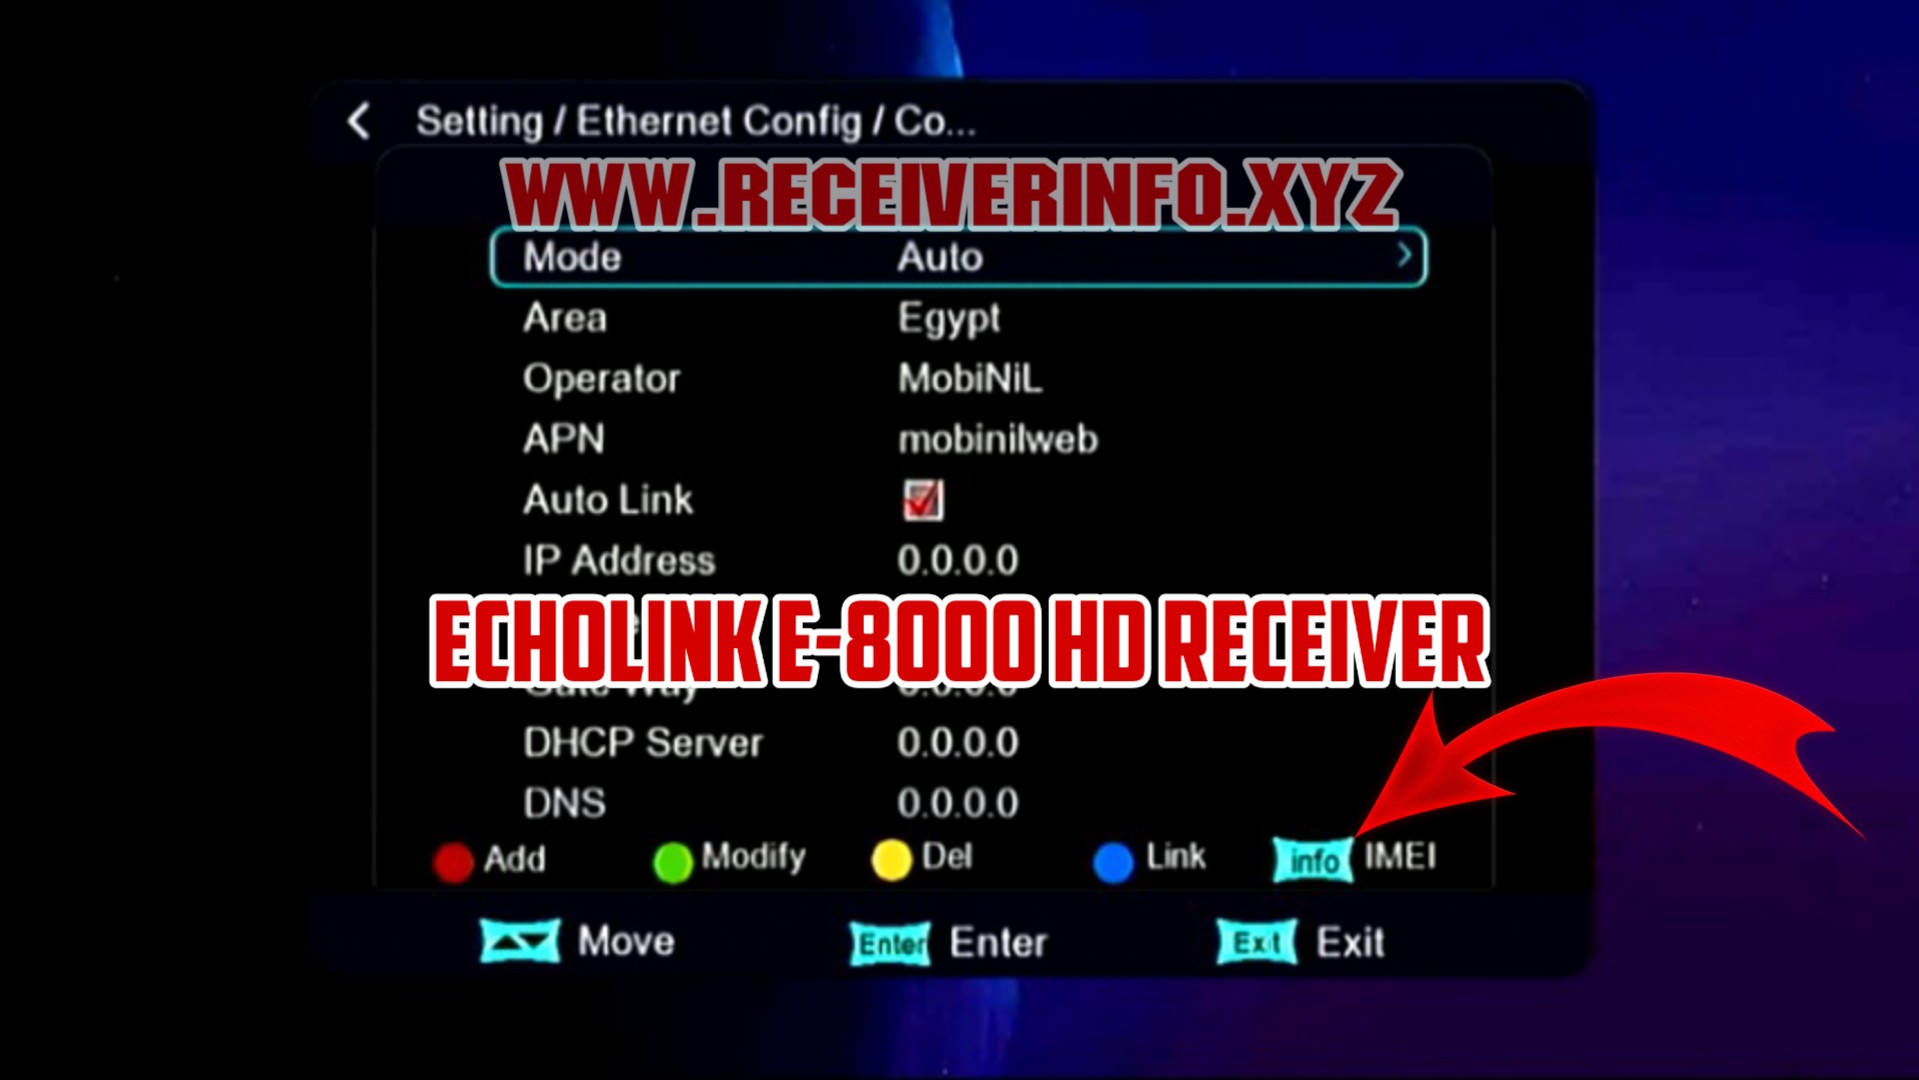 ECHOLINK E-8000 1506T HD RECEIVER NEW SOFTWARE WITH IMEI CHANGE